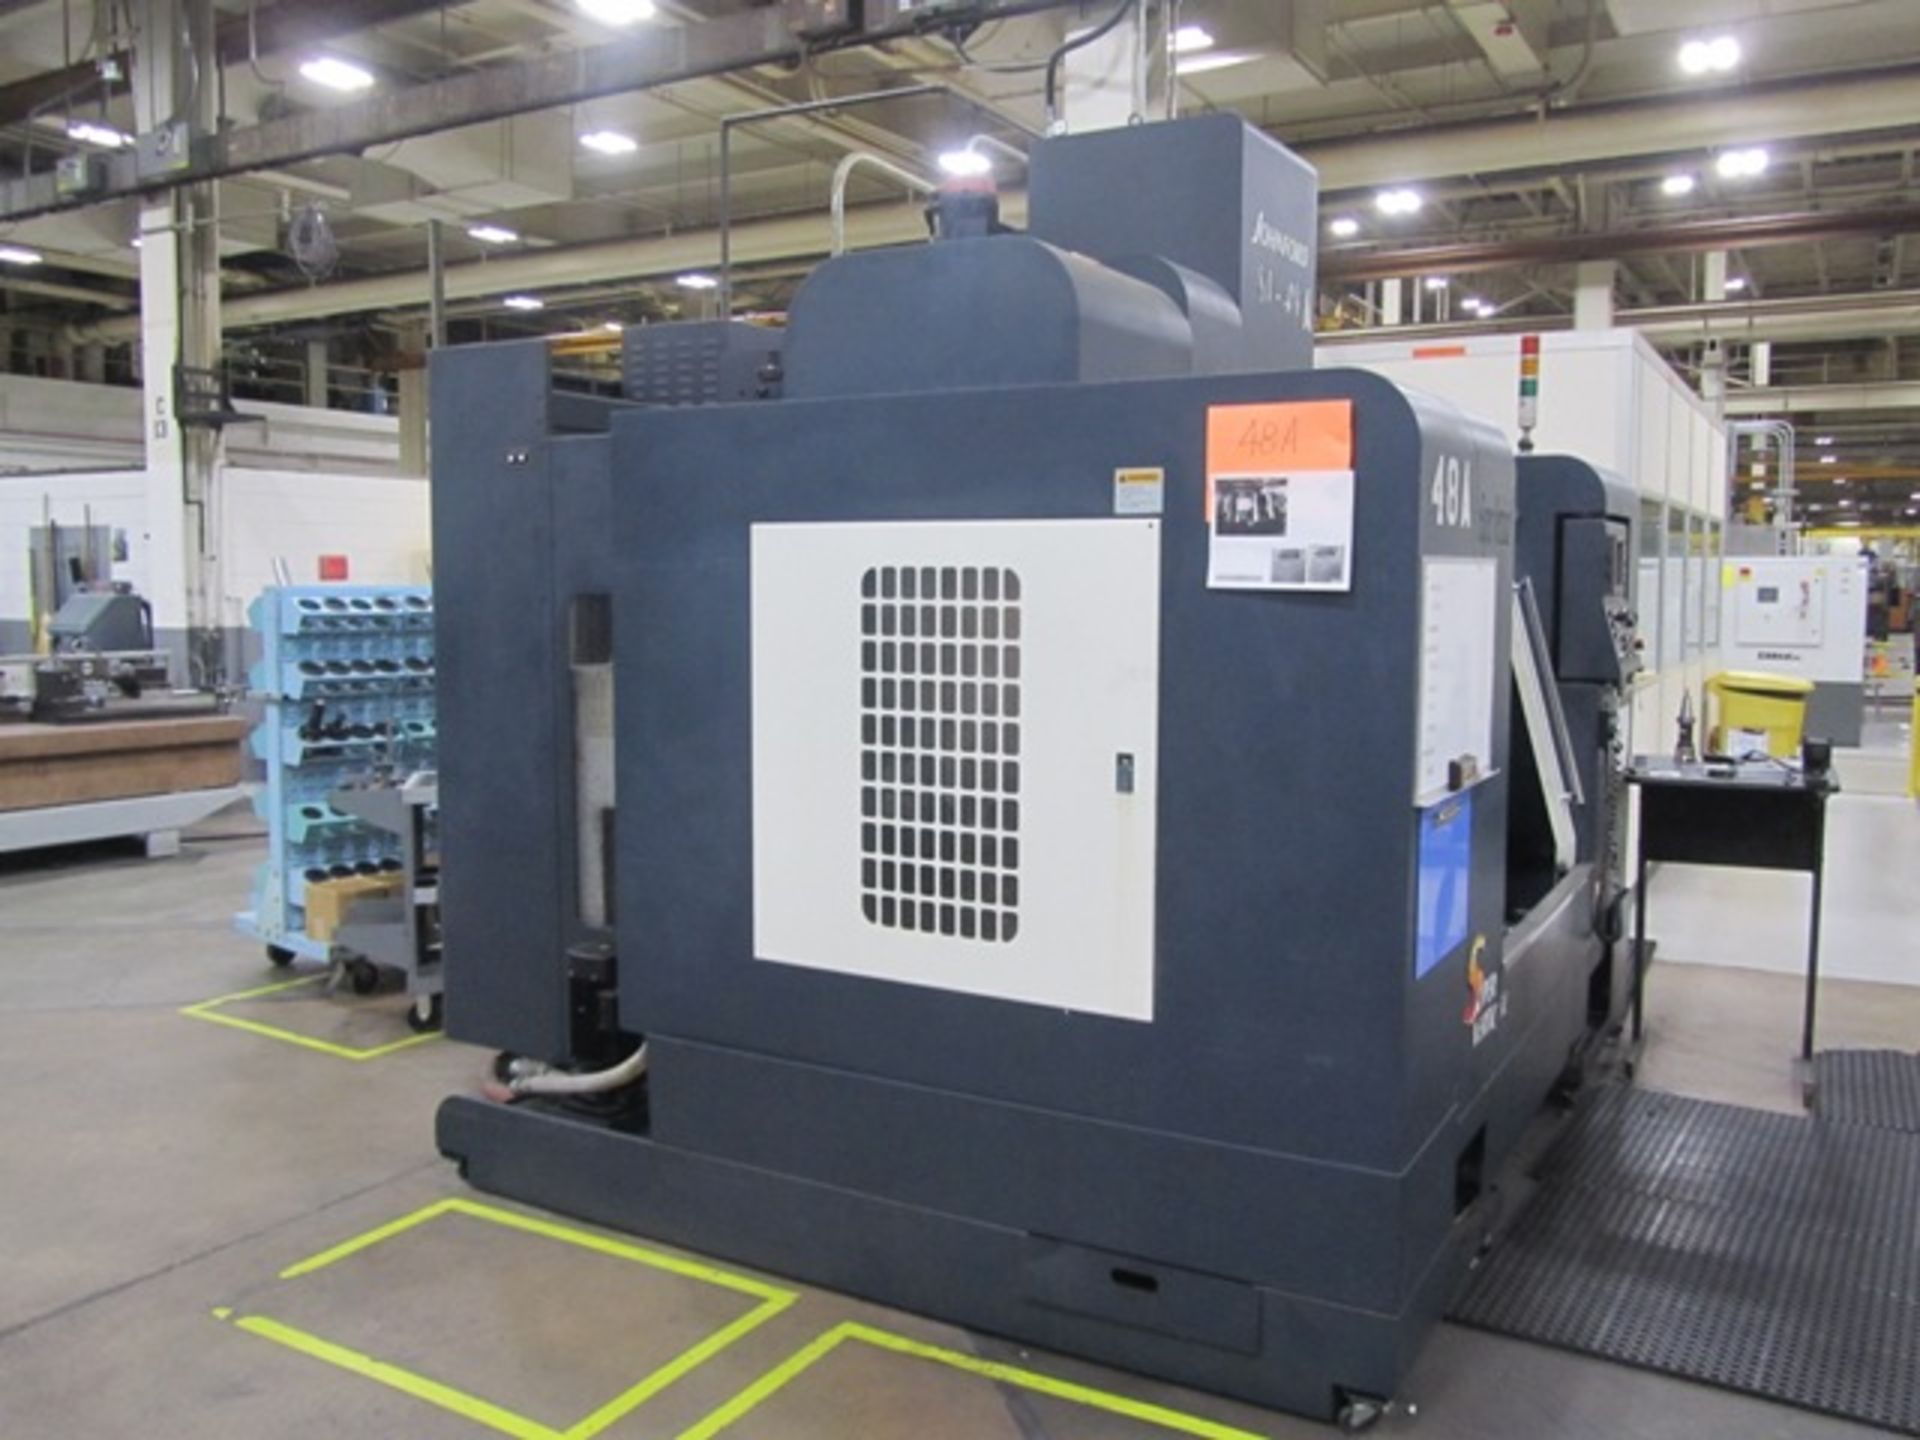 Johnford Model SV-48 Super 4-Axis CNC Vertical Machining Center with 10" Tsudakoma 4th Axis Rotary - Image 7 of 11